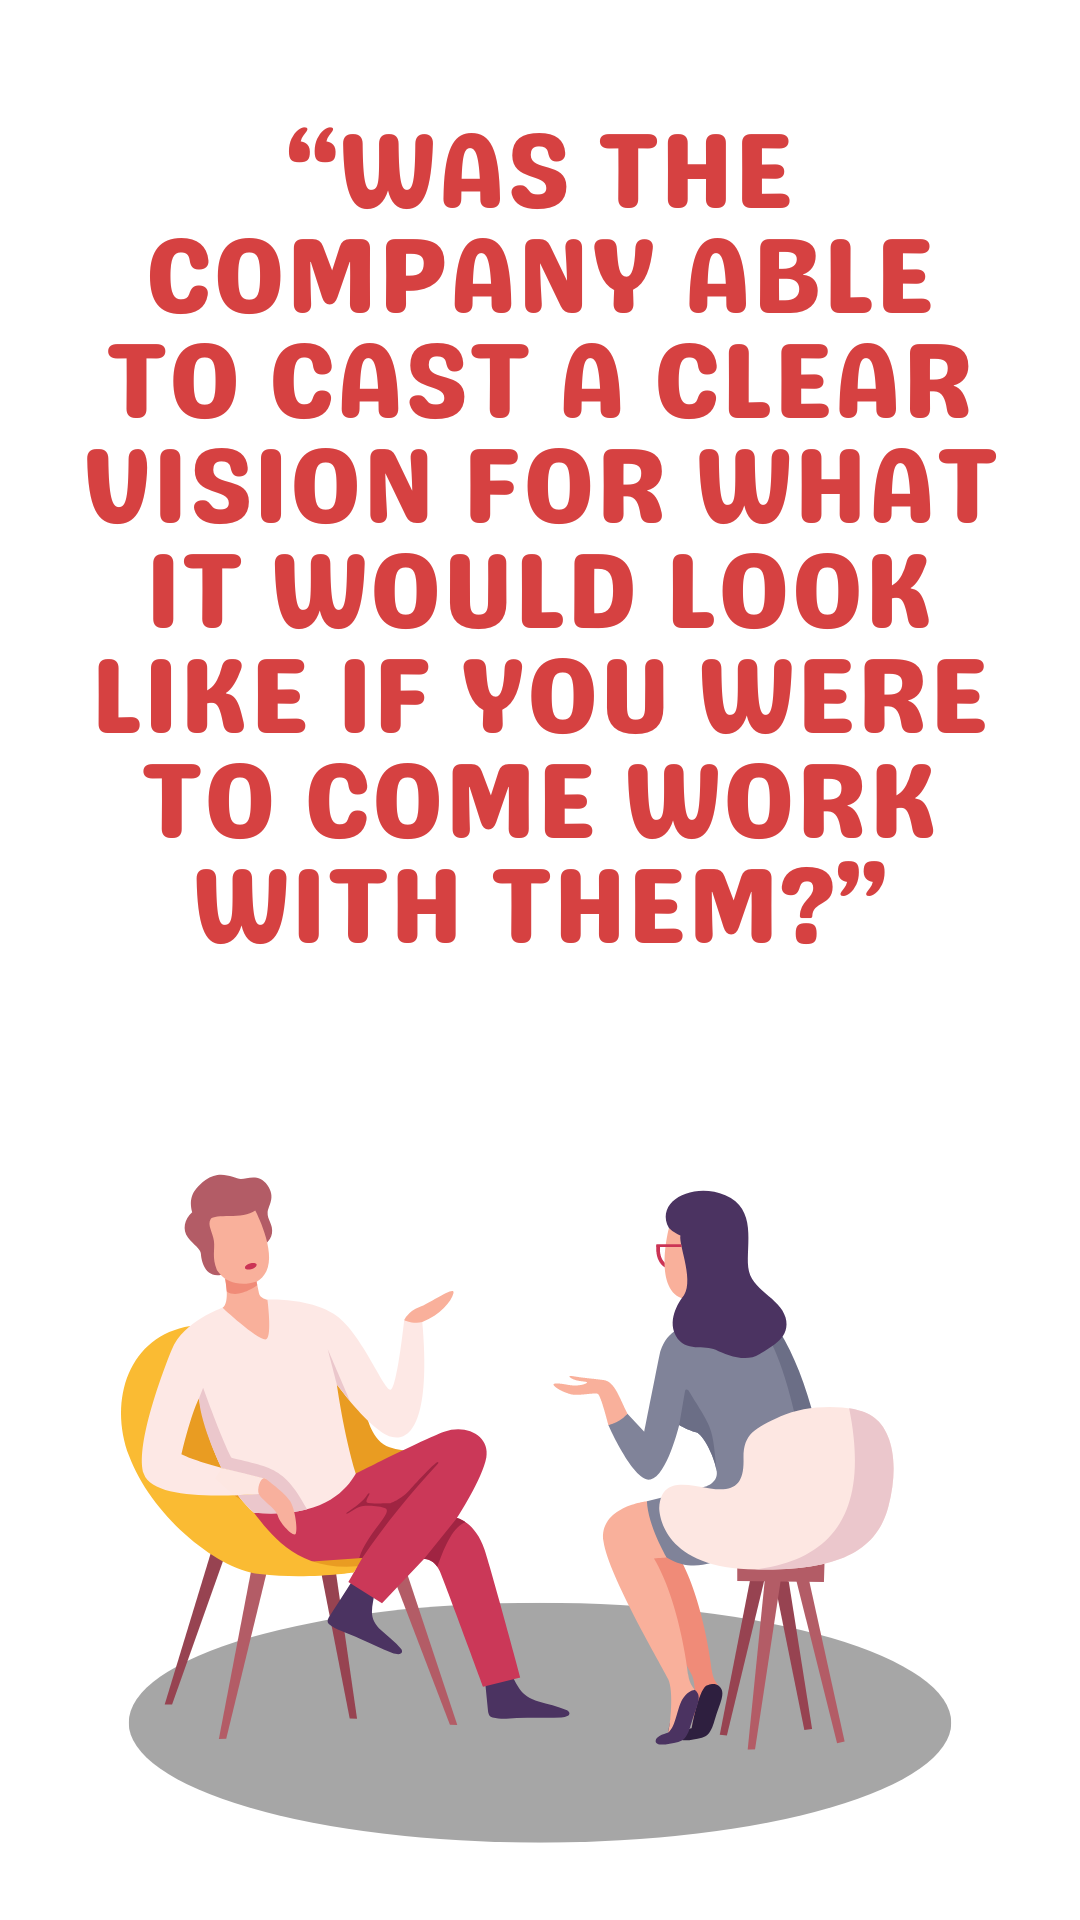 “Was the company able to cast a clear vision for what it would look like in your state if you were to come work with them”